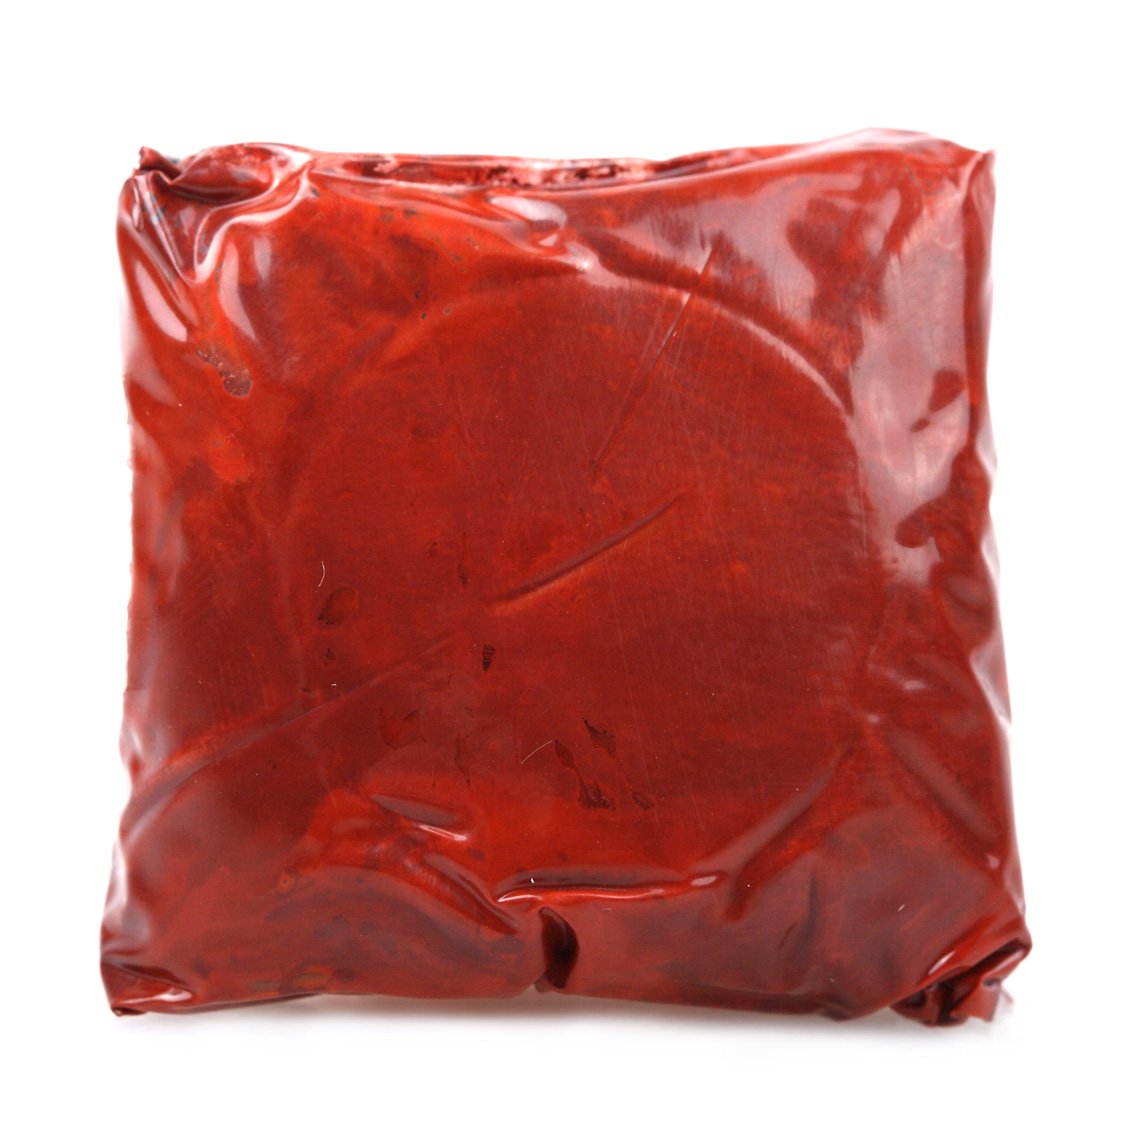 Special red Chinese seal paste in a traditional rare shade of red whith is a deep hue of red distinguishing it from standard red colored pastes.